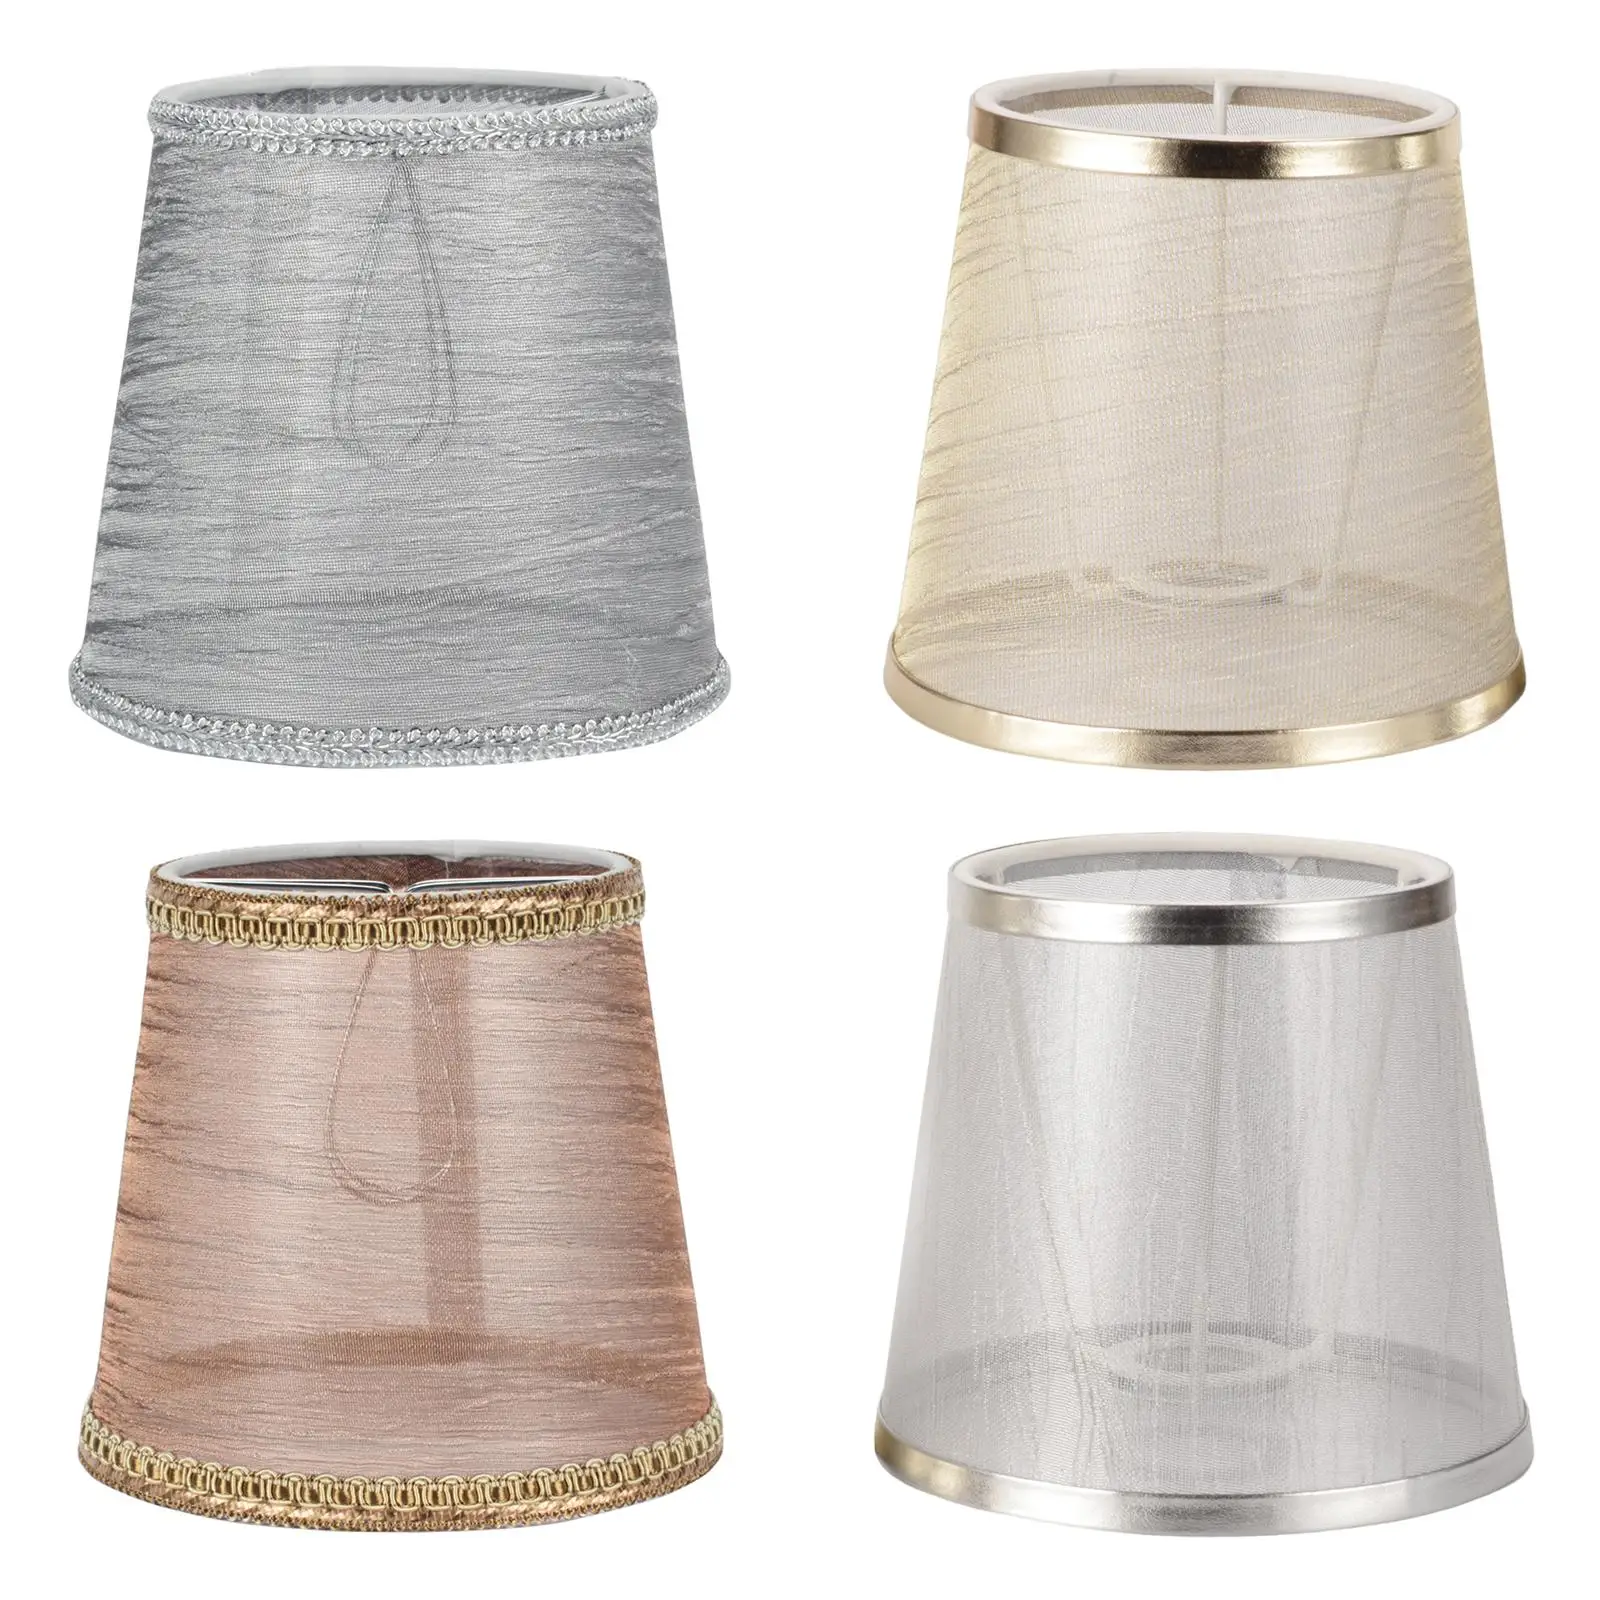 Modern Transparent Lamp Shade Cover Decorative Fabric Lampshade for Chandelier Pendant Wall Lamp Installation Parties